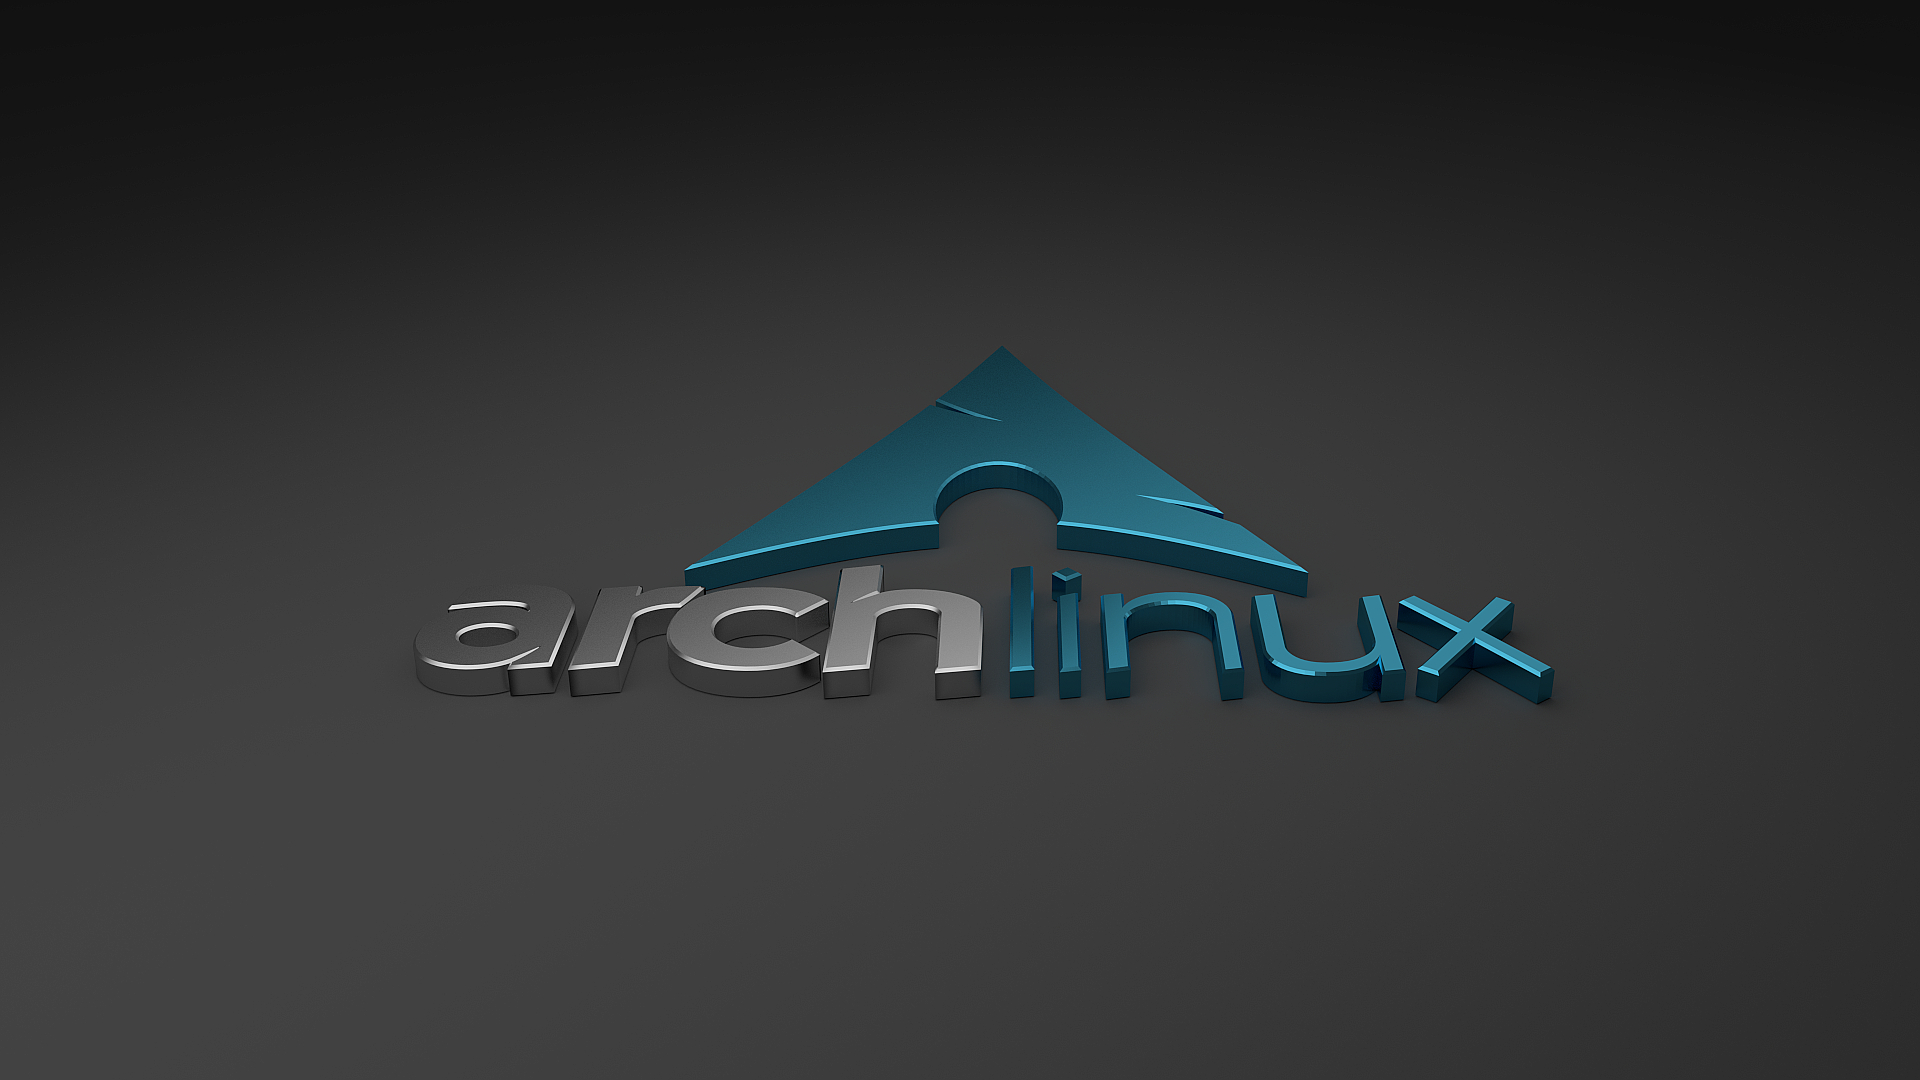 Download Free Arch Linux Background